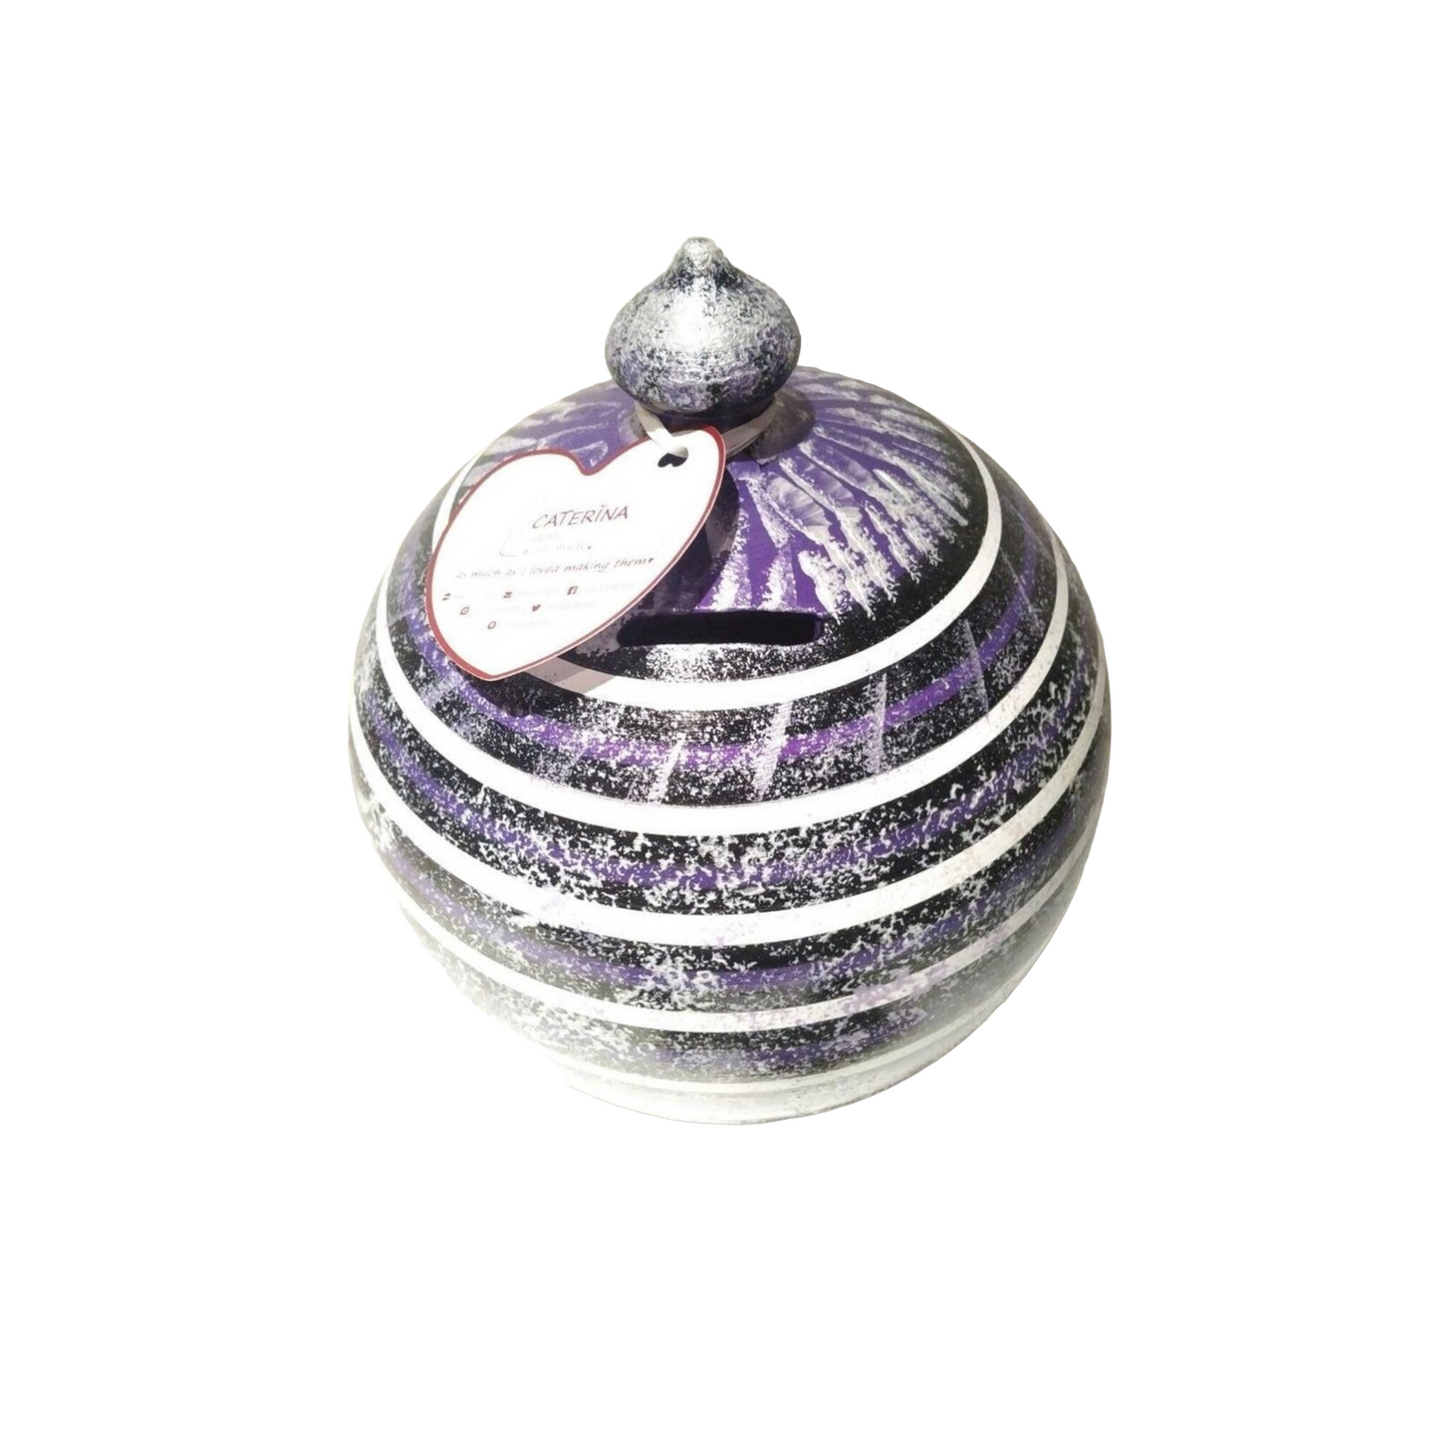 ultramarine violet white and black stripes piggy bank, with or without hole.